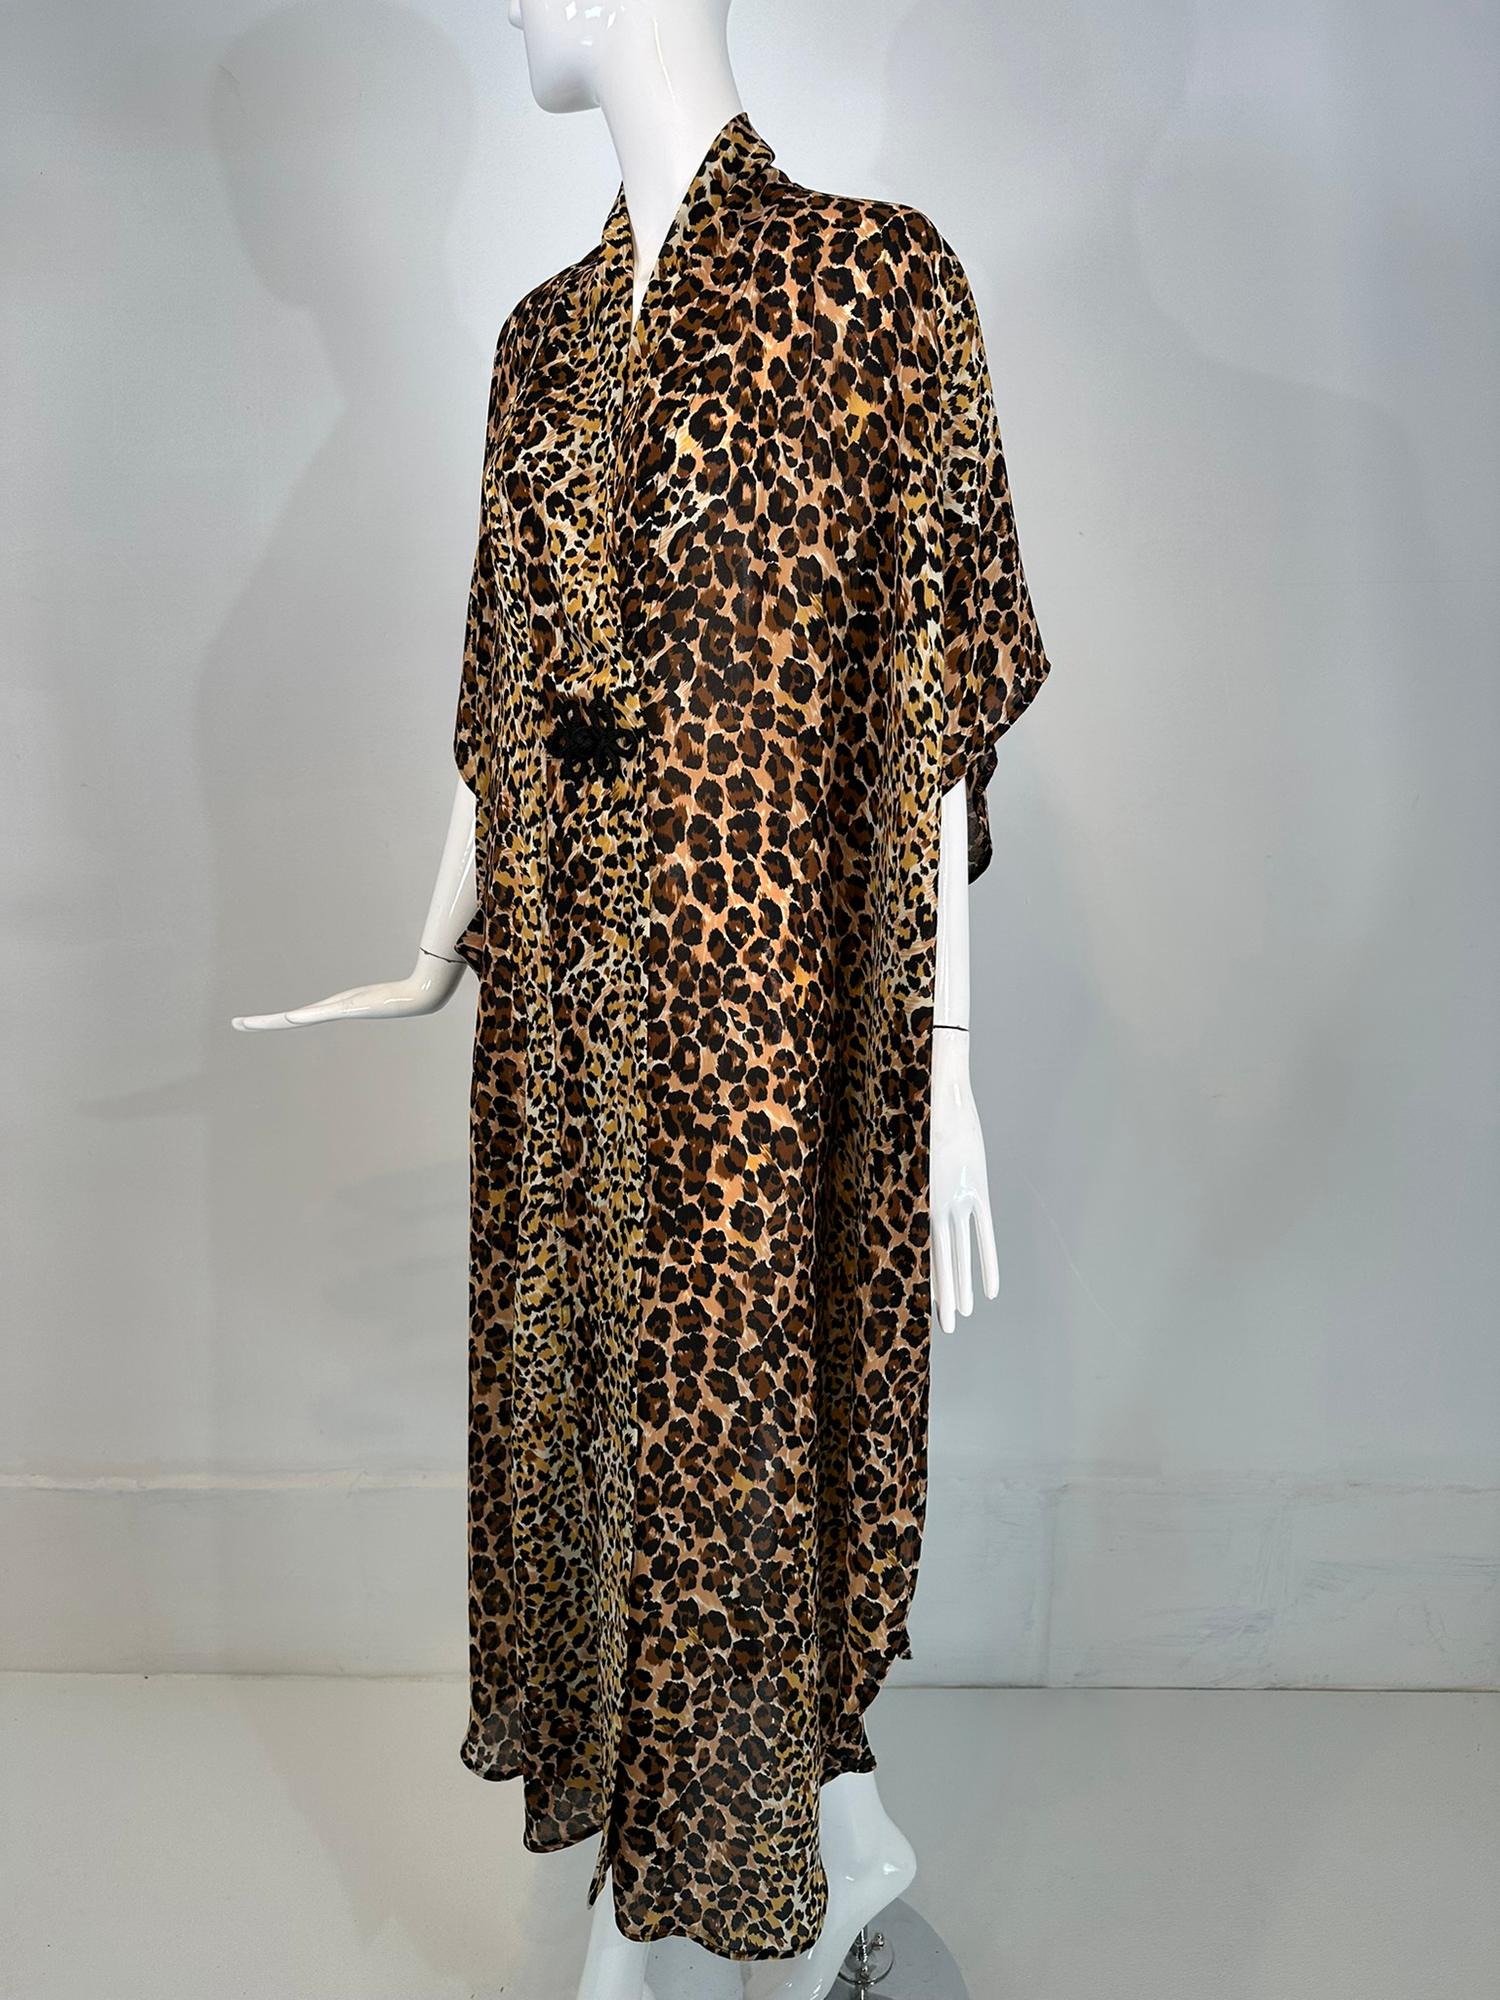 1960s Leopard pint crepe caftan robe by Marjorie Ellin Inc. Perfect for the pool or beach or entertaining at home. This caftan wraps at the front with a hidden Velcro closure and a decorative black fabric frog at the front. There is a single large